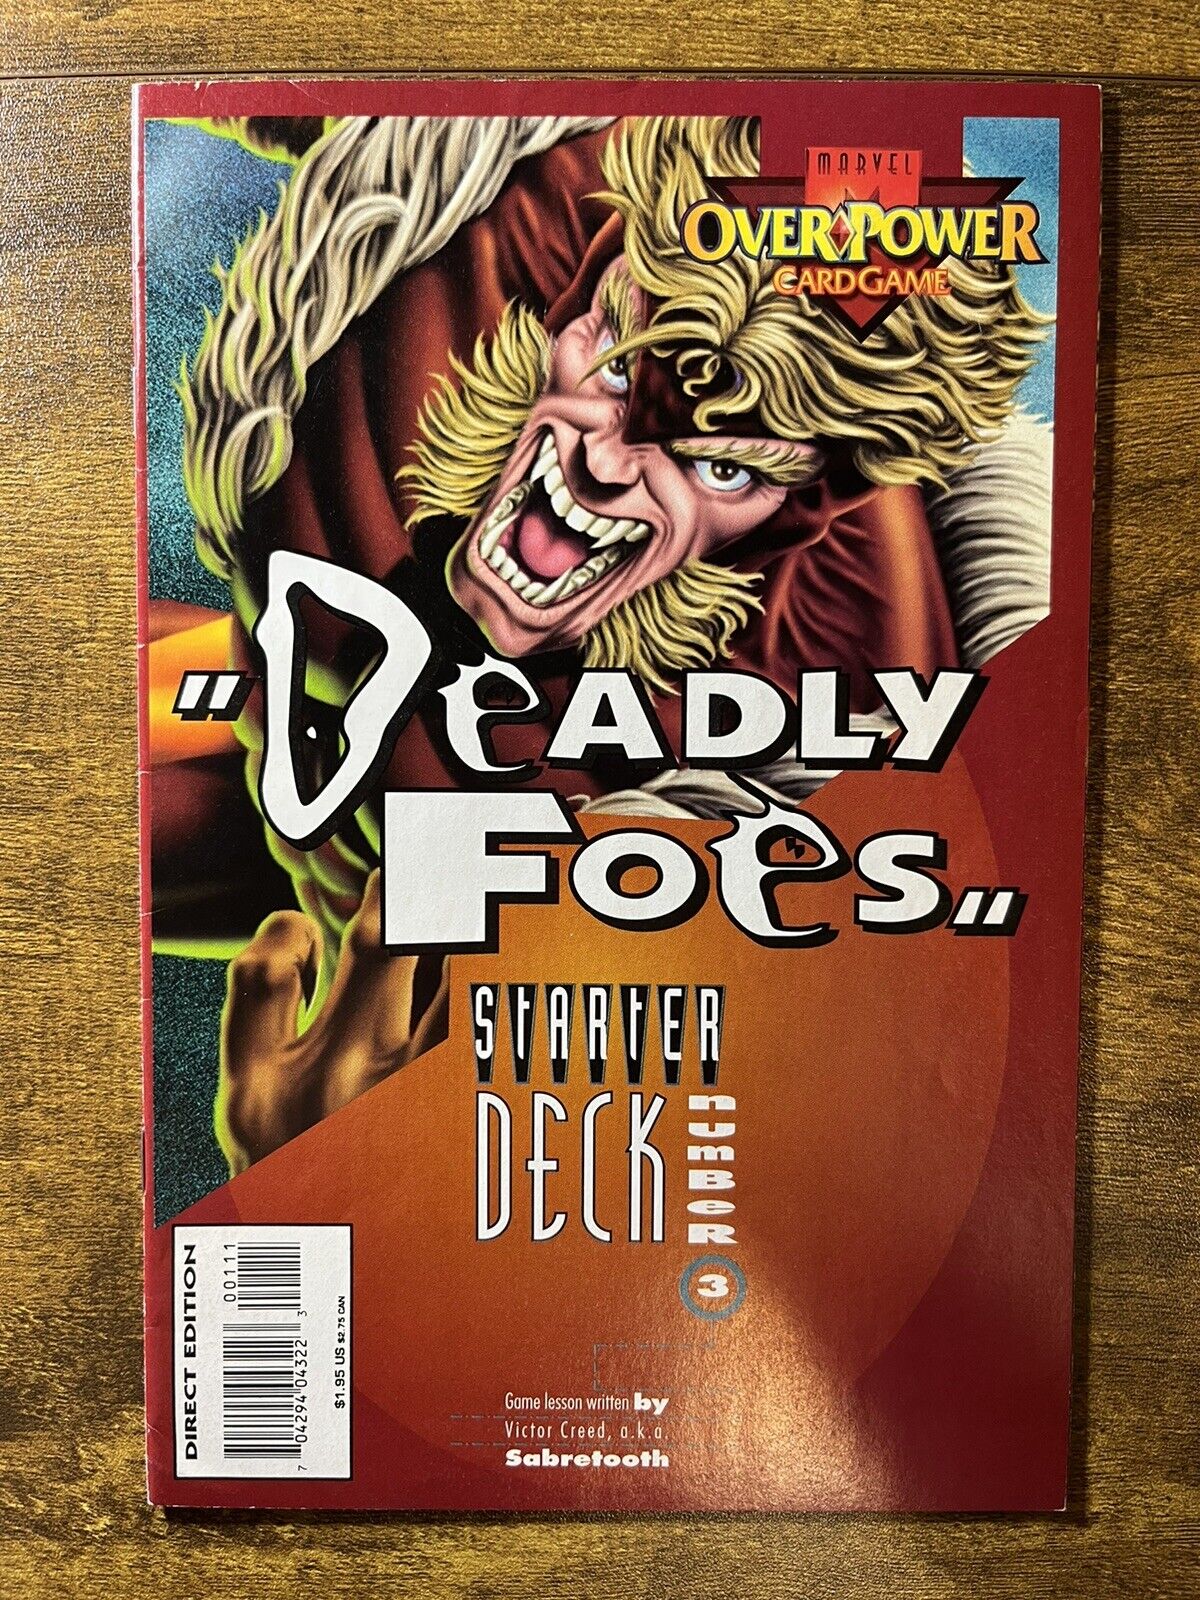 MARVEL OVERPOWER GAME GUIDE: DEADLY FOES 3 SABRETOOTH MARVEL COMICS 1995